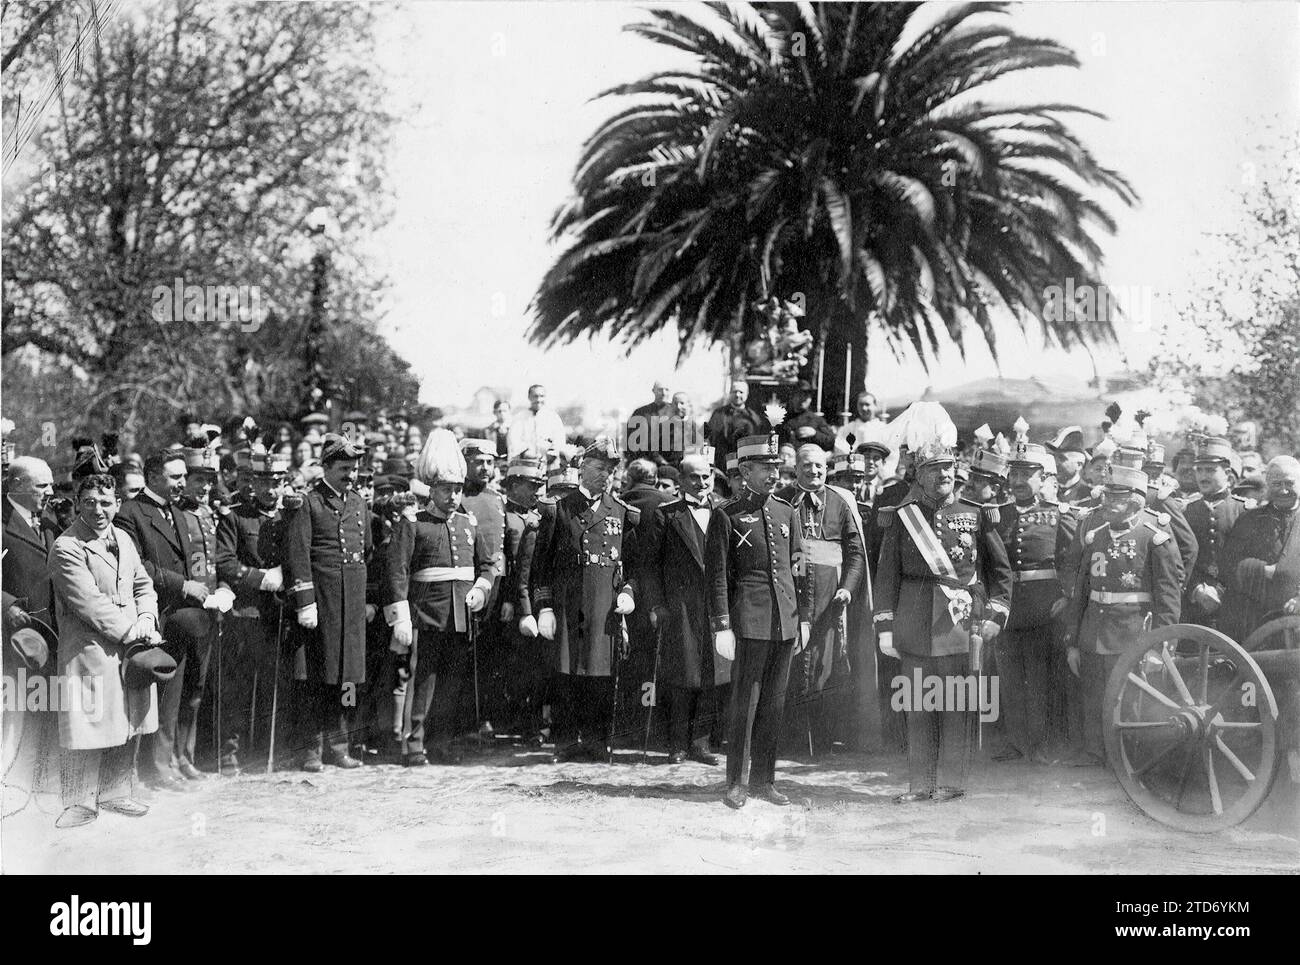 04/01/1922. Vigo. Imposition of a Laureate cross. The lieutenant colonel of Invalides Mr. Manuel Barreiro (X), after being awarded by the military governor the Laureate cross of Saint Ferdinand, with which his heroic behavior in Morocco was awarded. Photo: Jaime Pacheco. Credit: Album / Archivo ABC / Jaime Pacheco Stock Photo